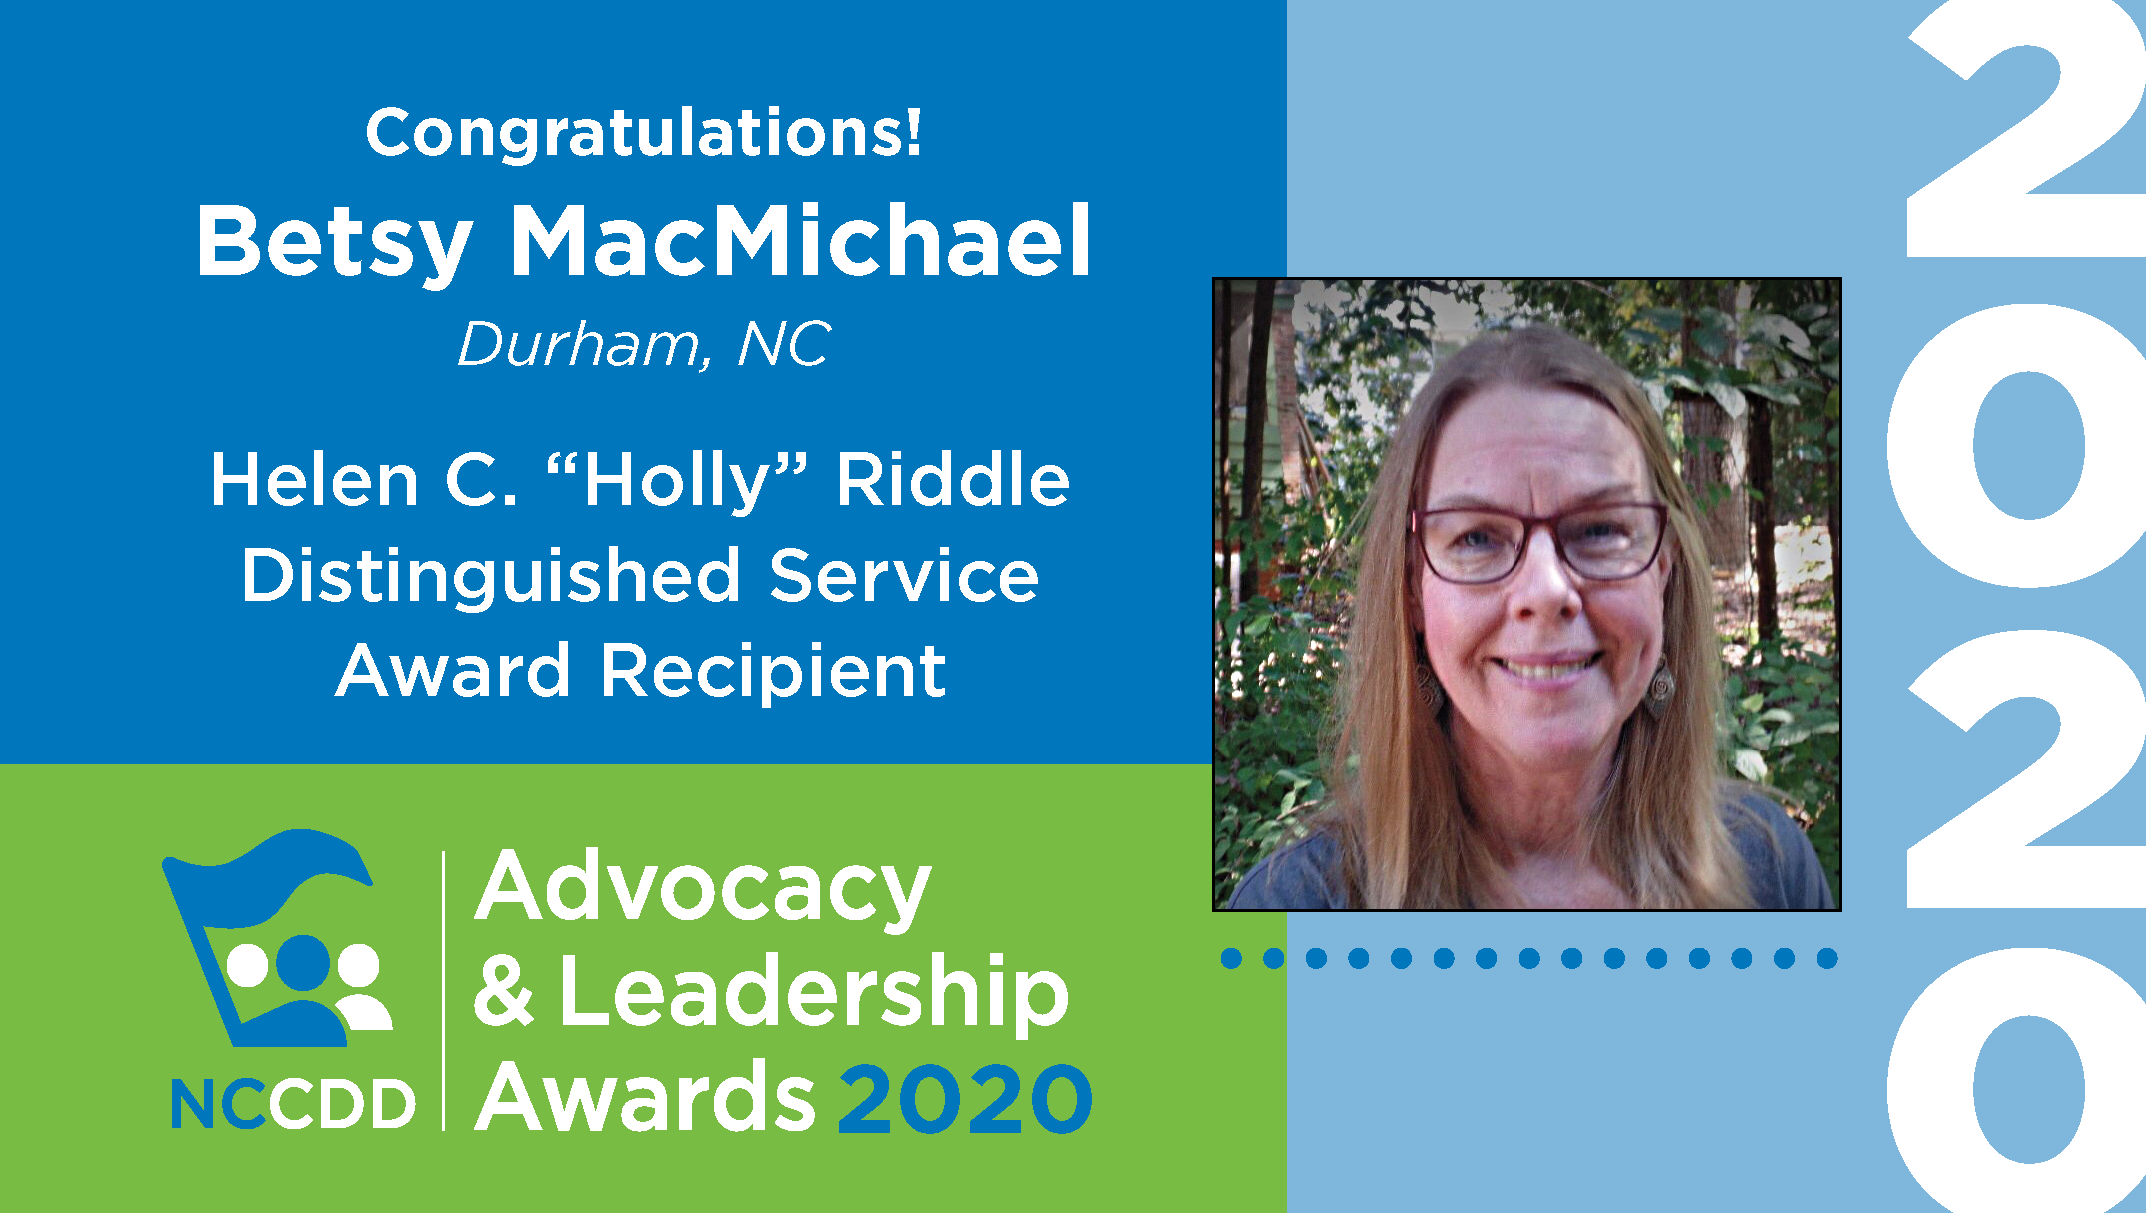 Helen C. "Holly" Riddle Distinguished Service Award recipient Betsy MacMichael